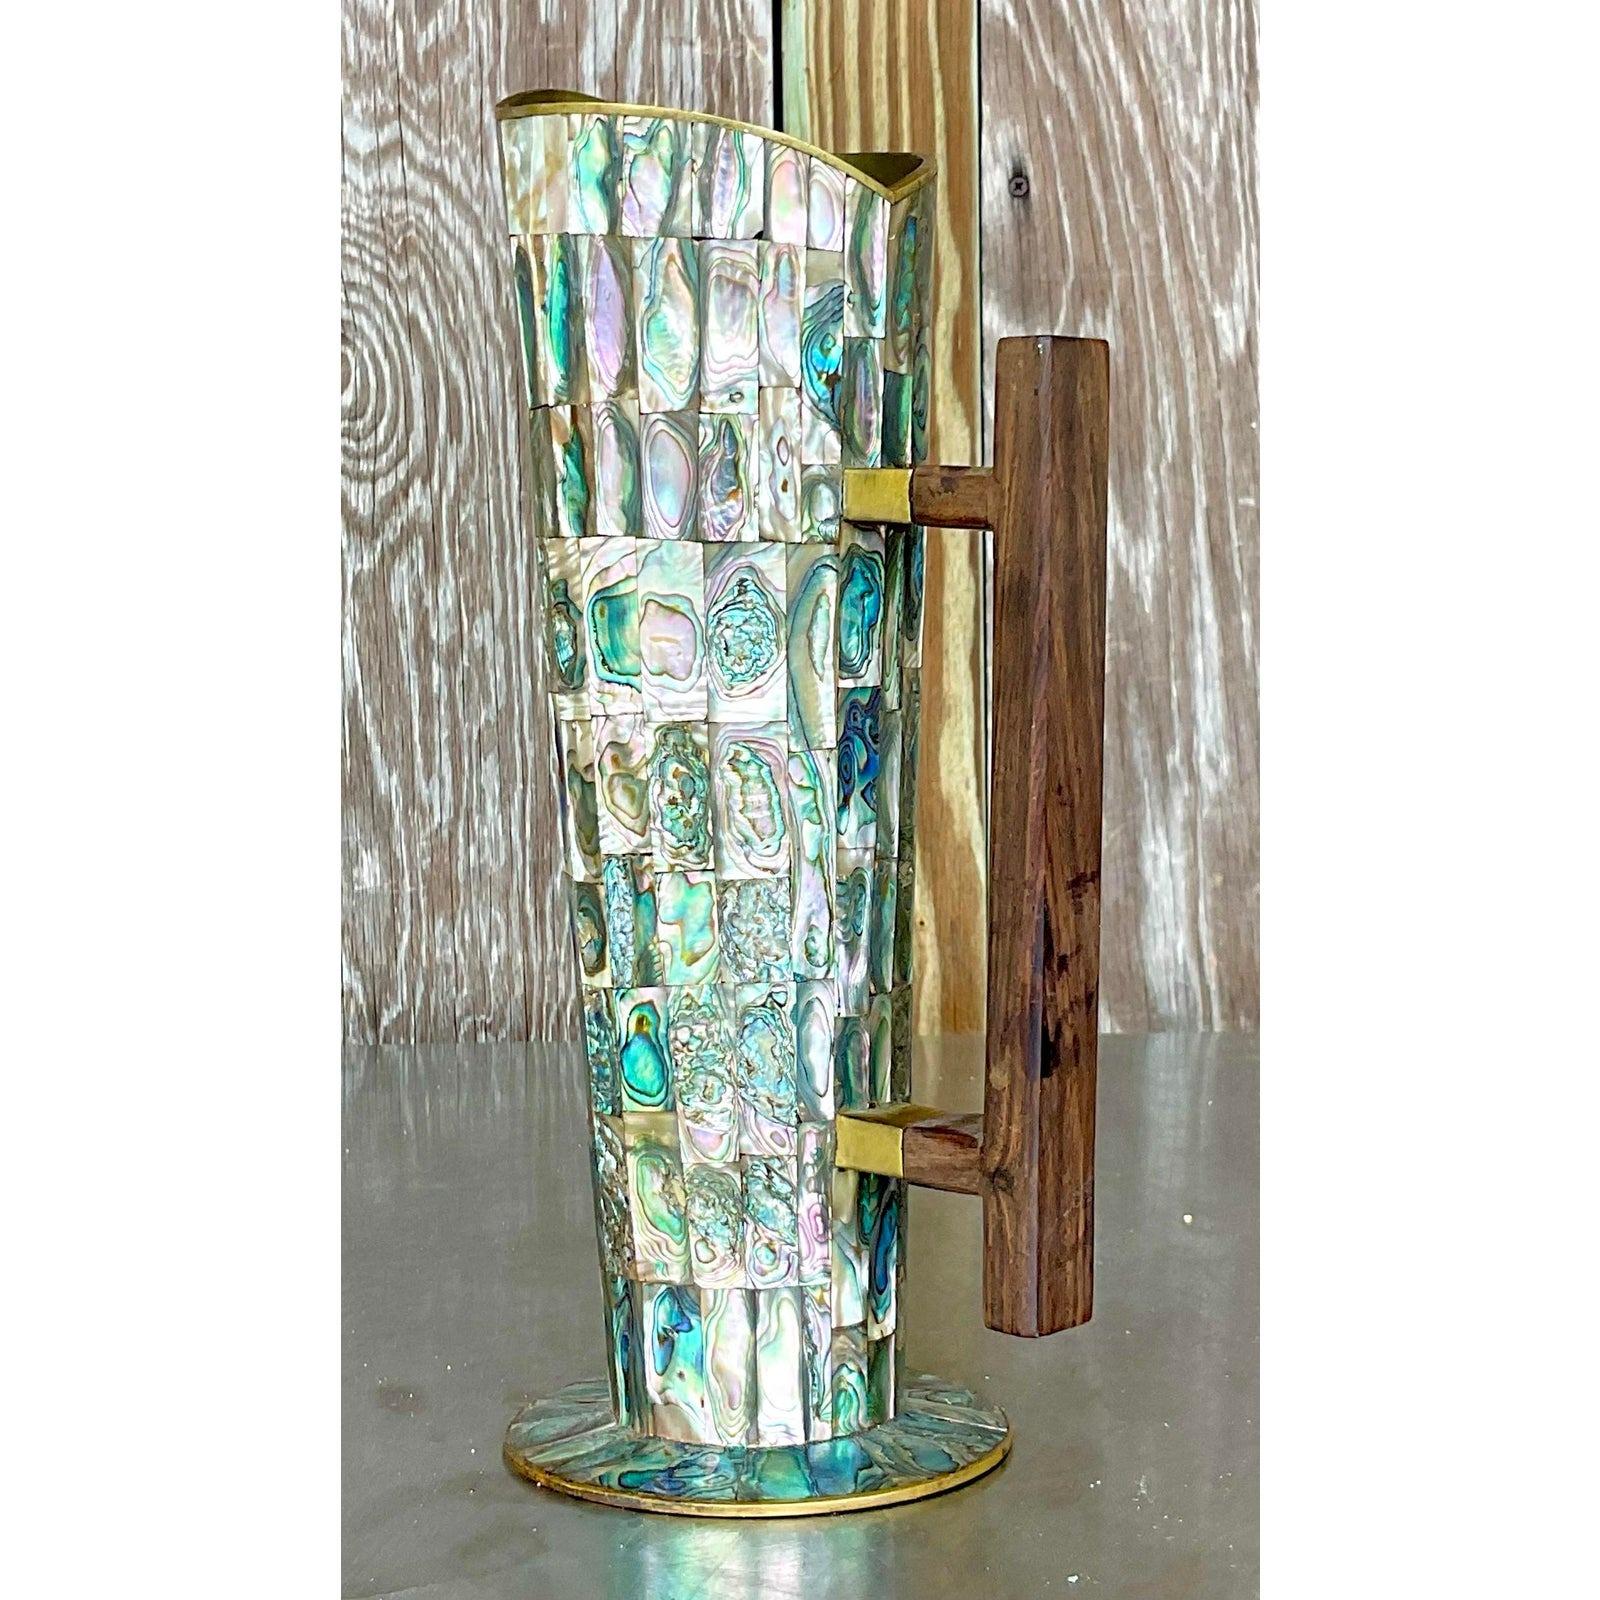 Elevate your décor with the Vintage Coastal Abalone and Brass Pitcher. This American-style piece features stunning abalone inlay and elegant brass detailing, perfect for adding a touch of coastal charm and timeless sophistication to your home